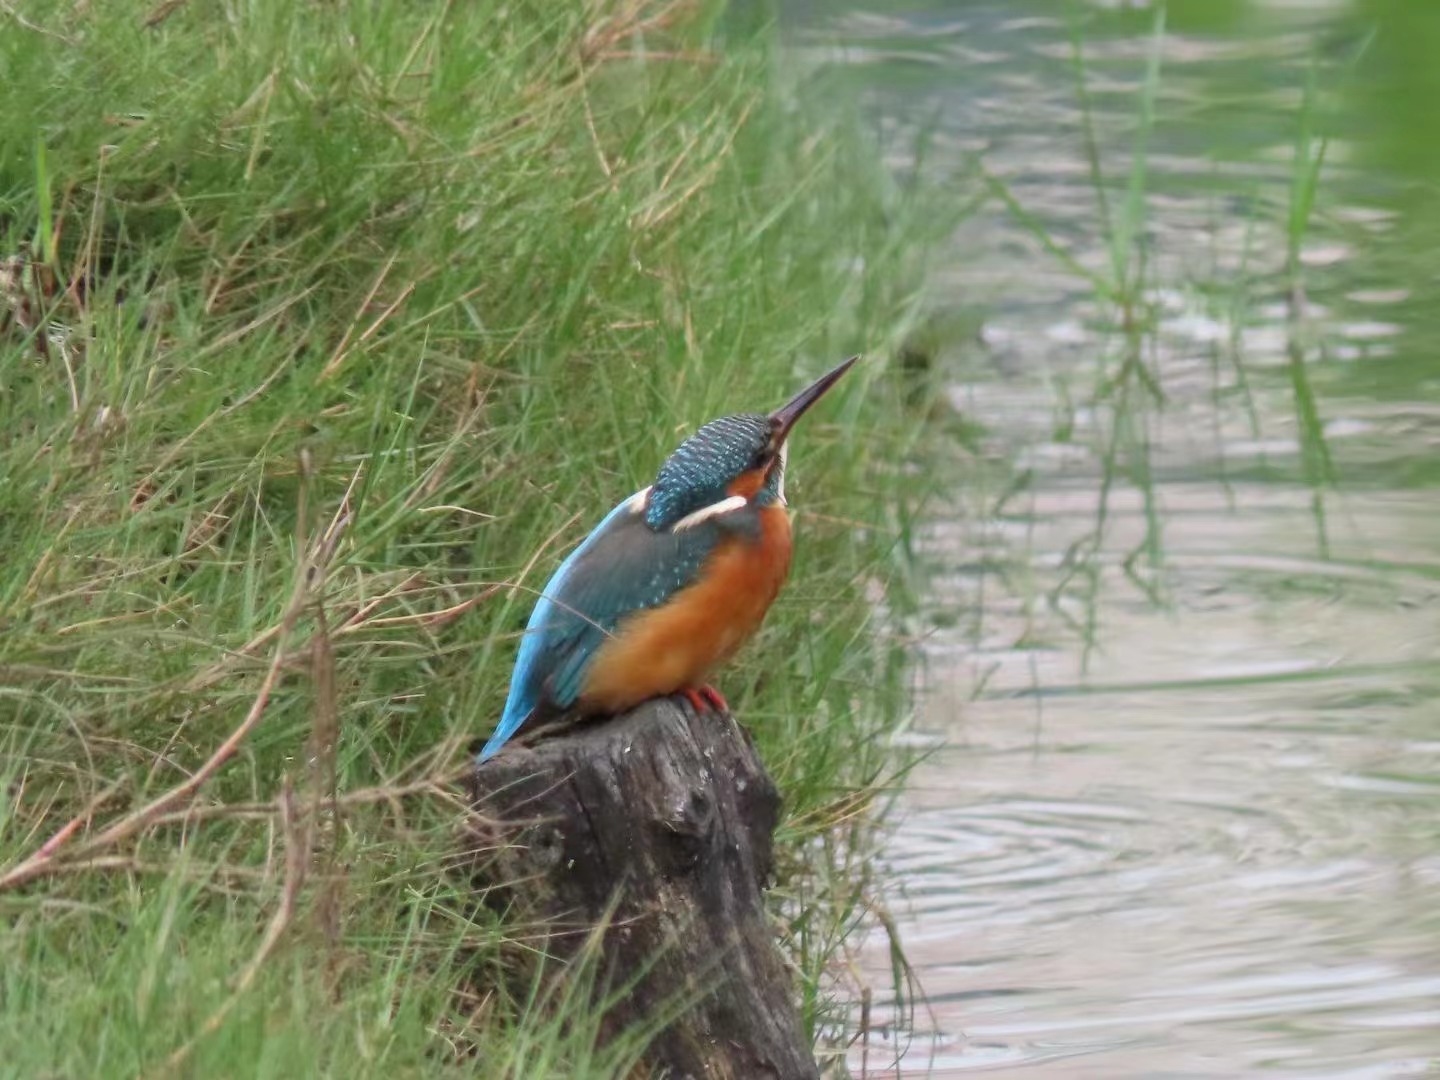 A common kingfisher, one of the most regular visitors of the lake.